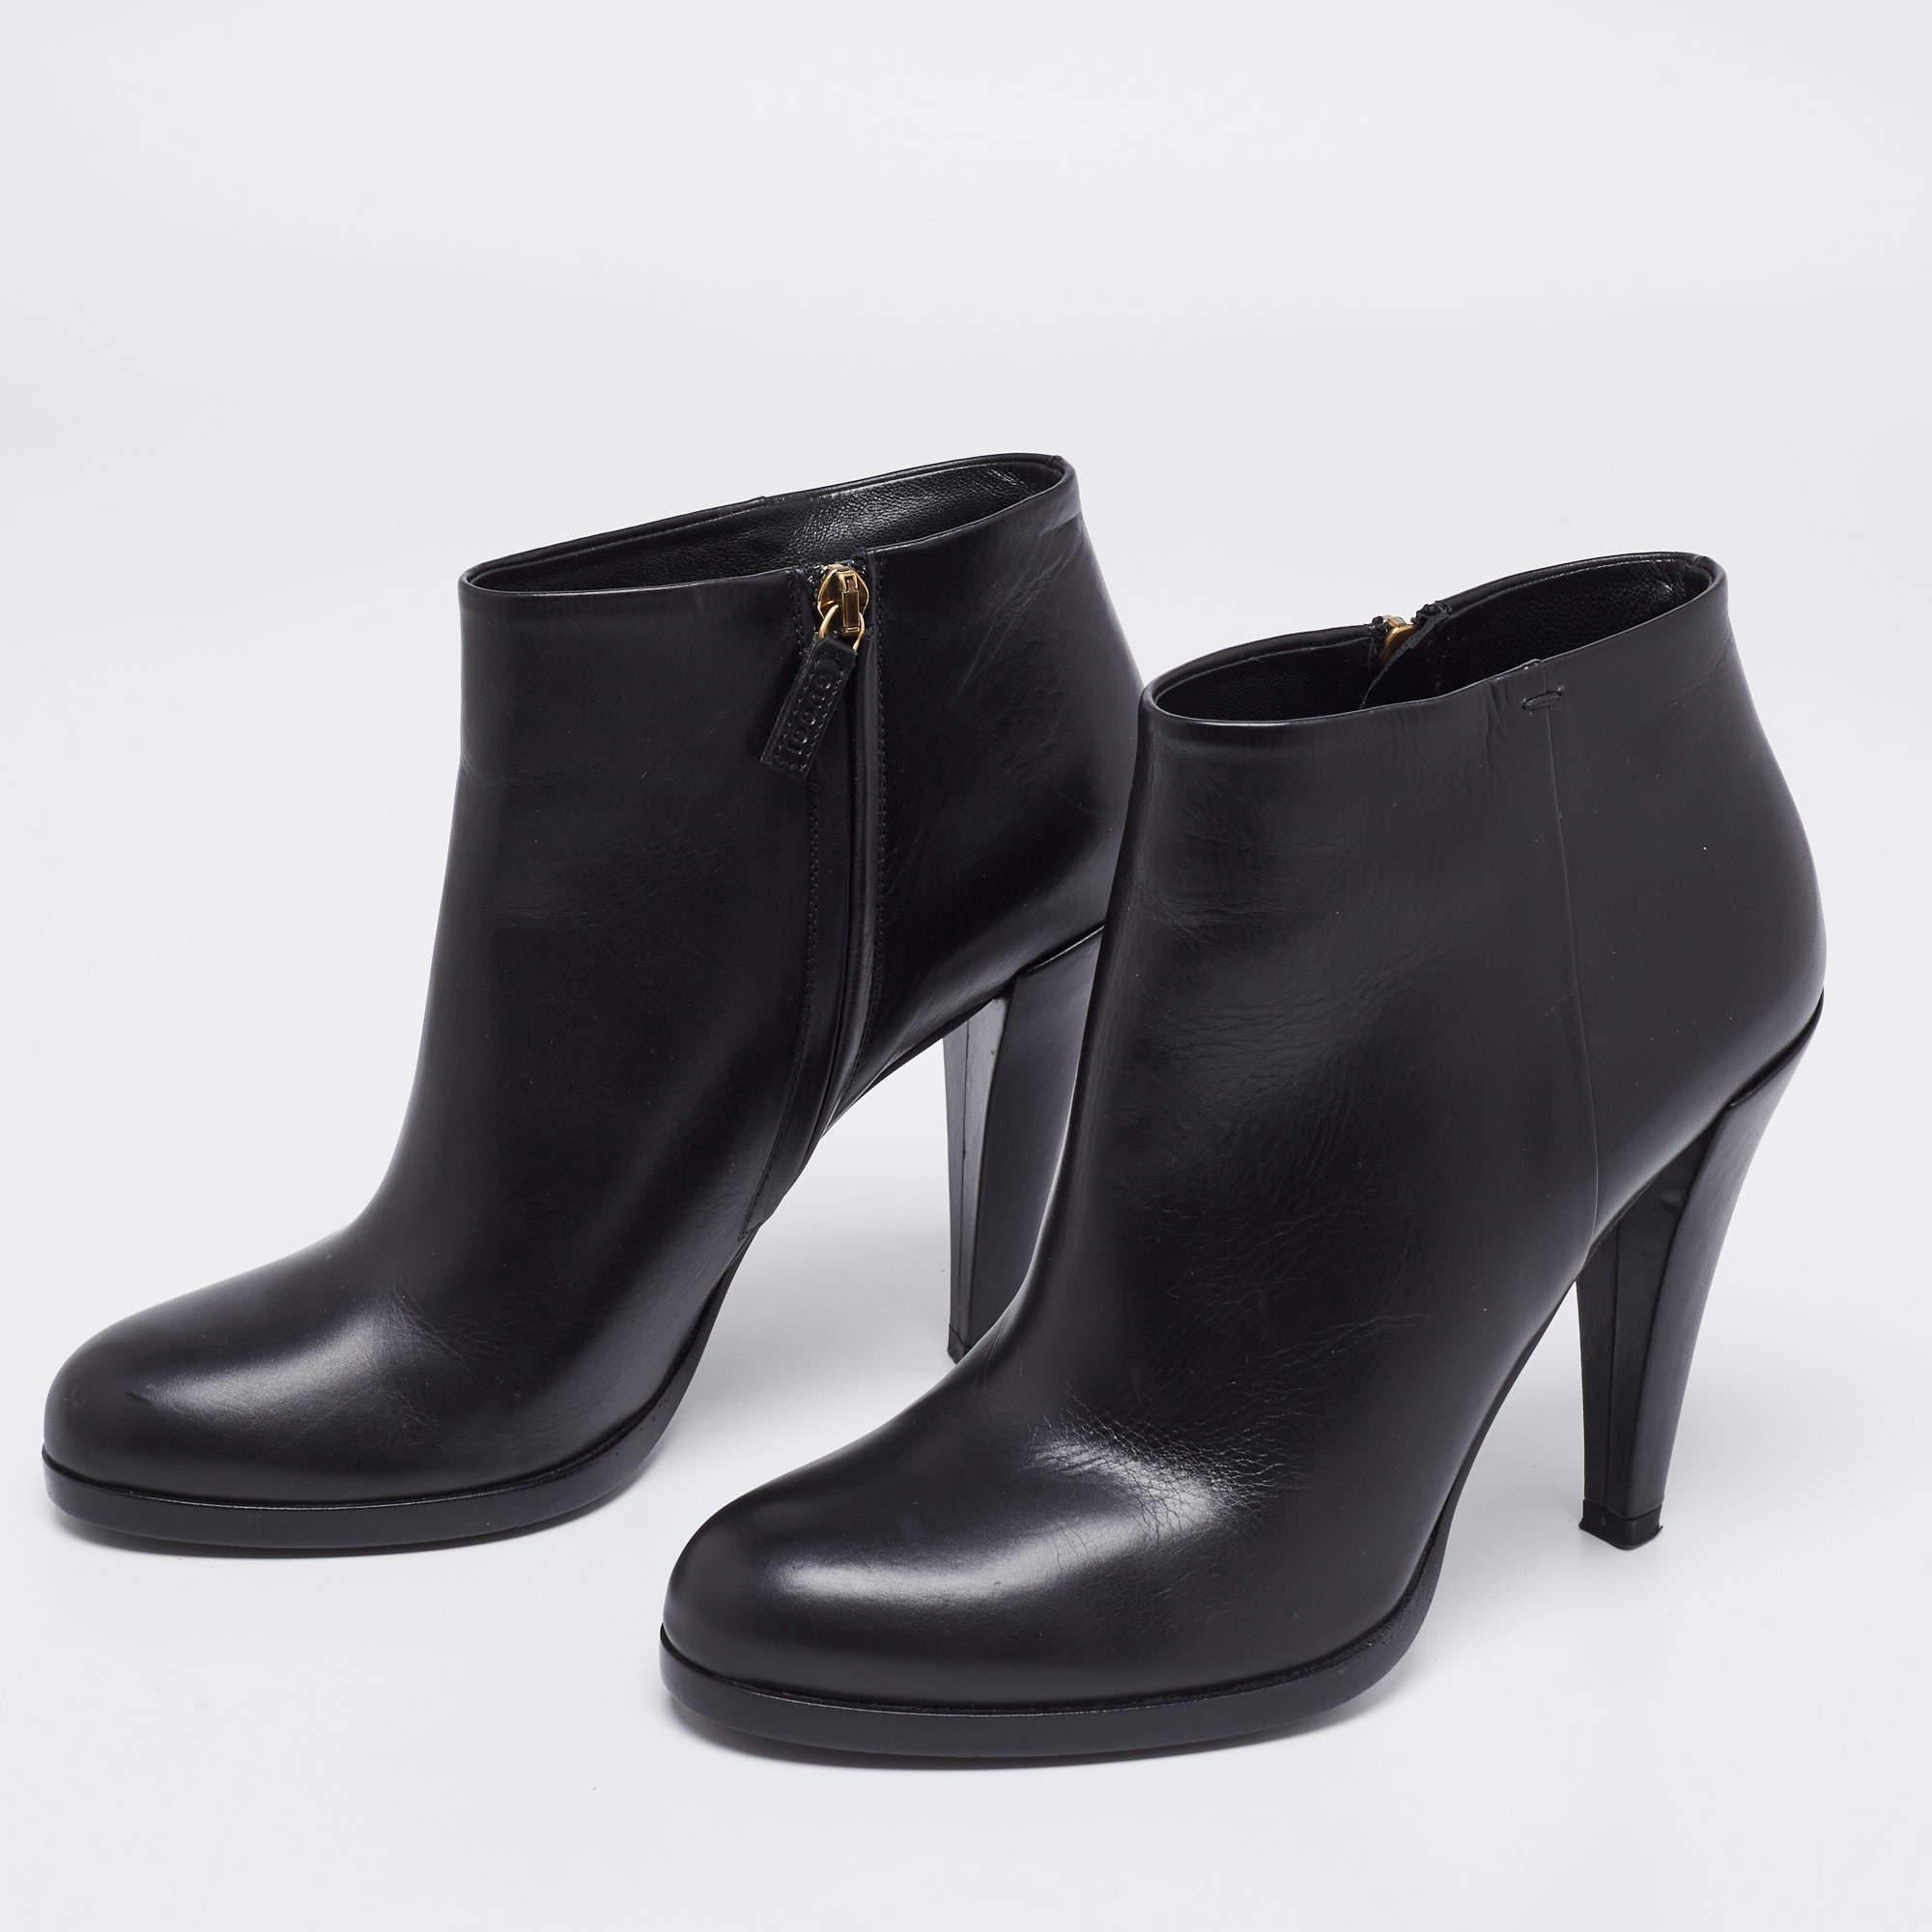 Gucci Black Leather Block Heel Ankle Boots Size 38.5 For Sale 4